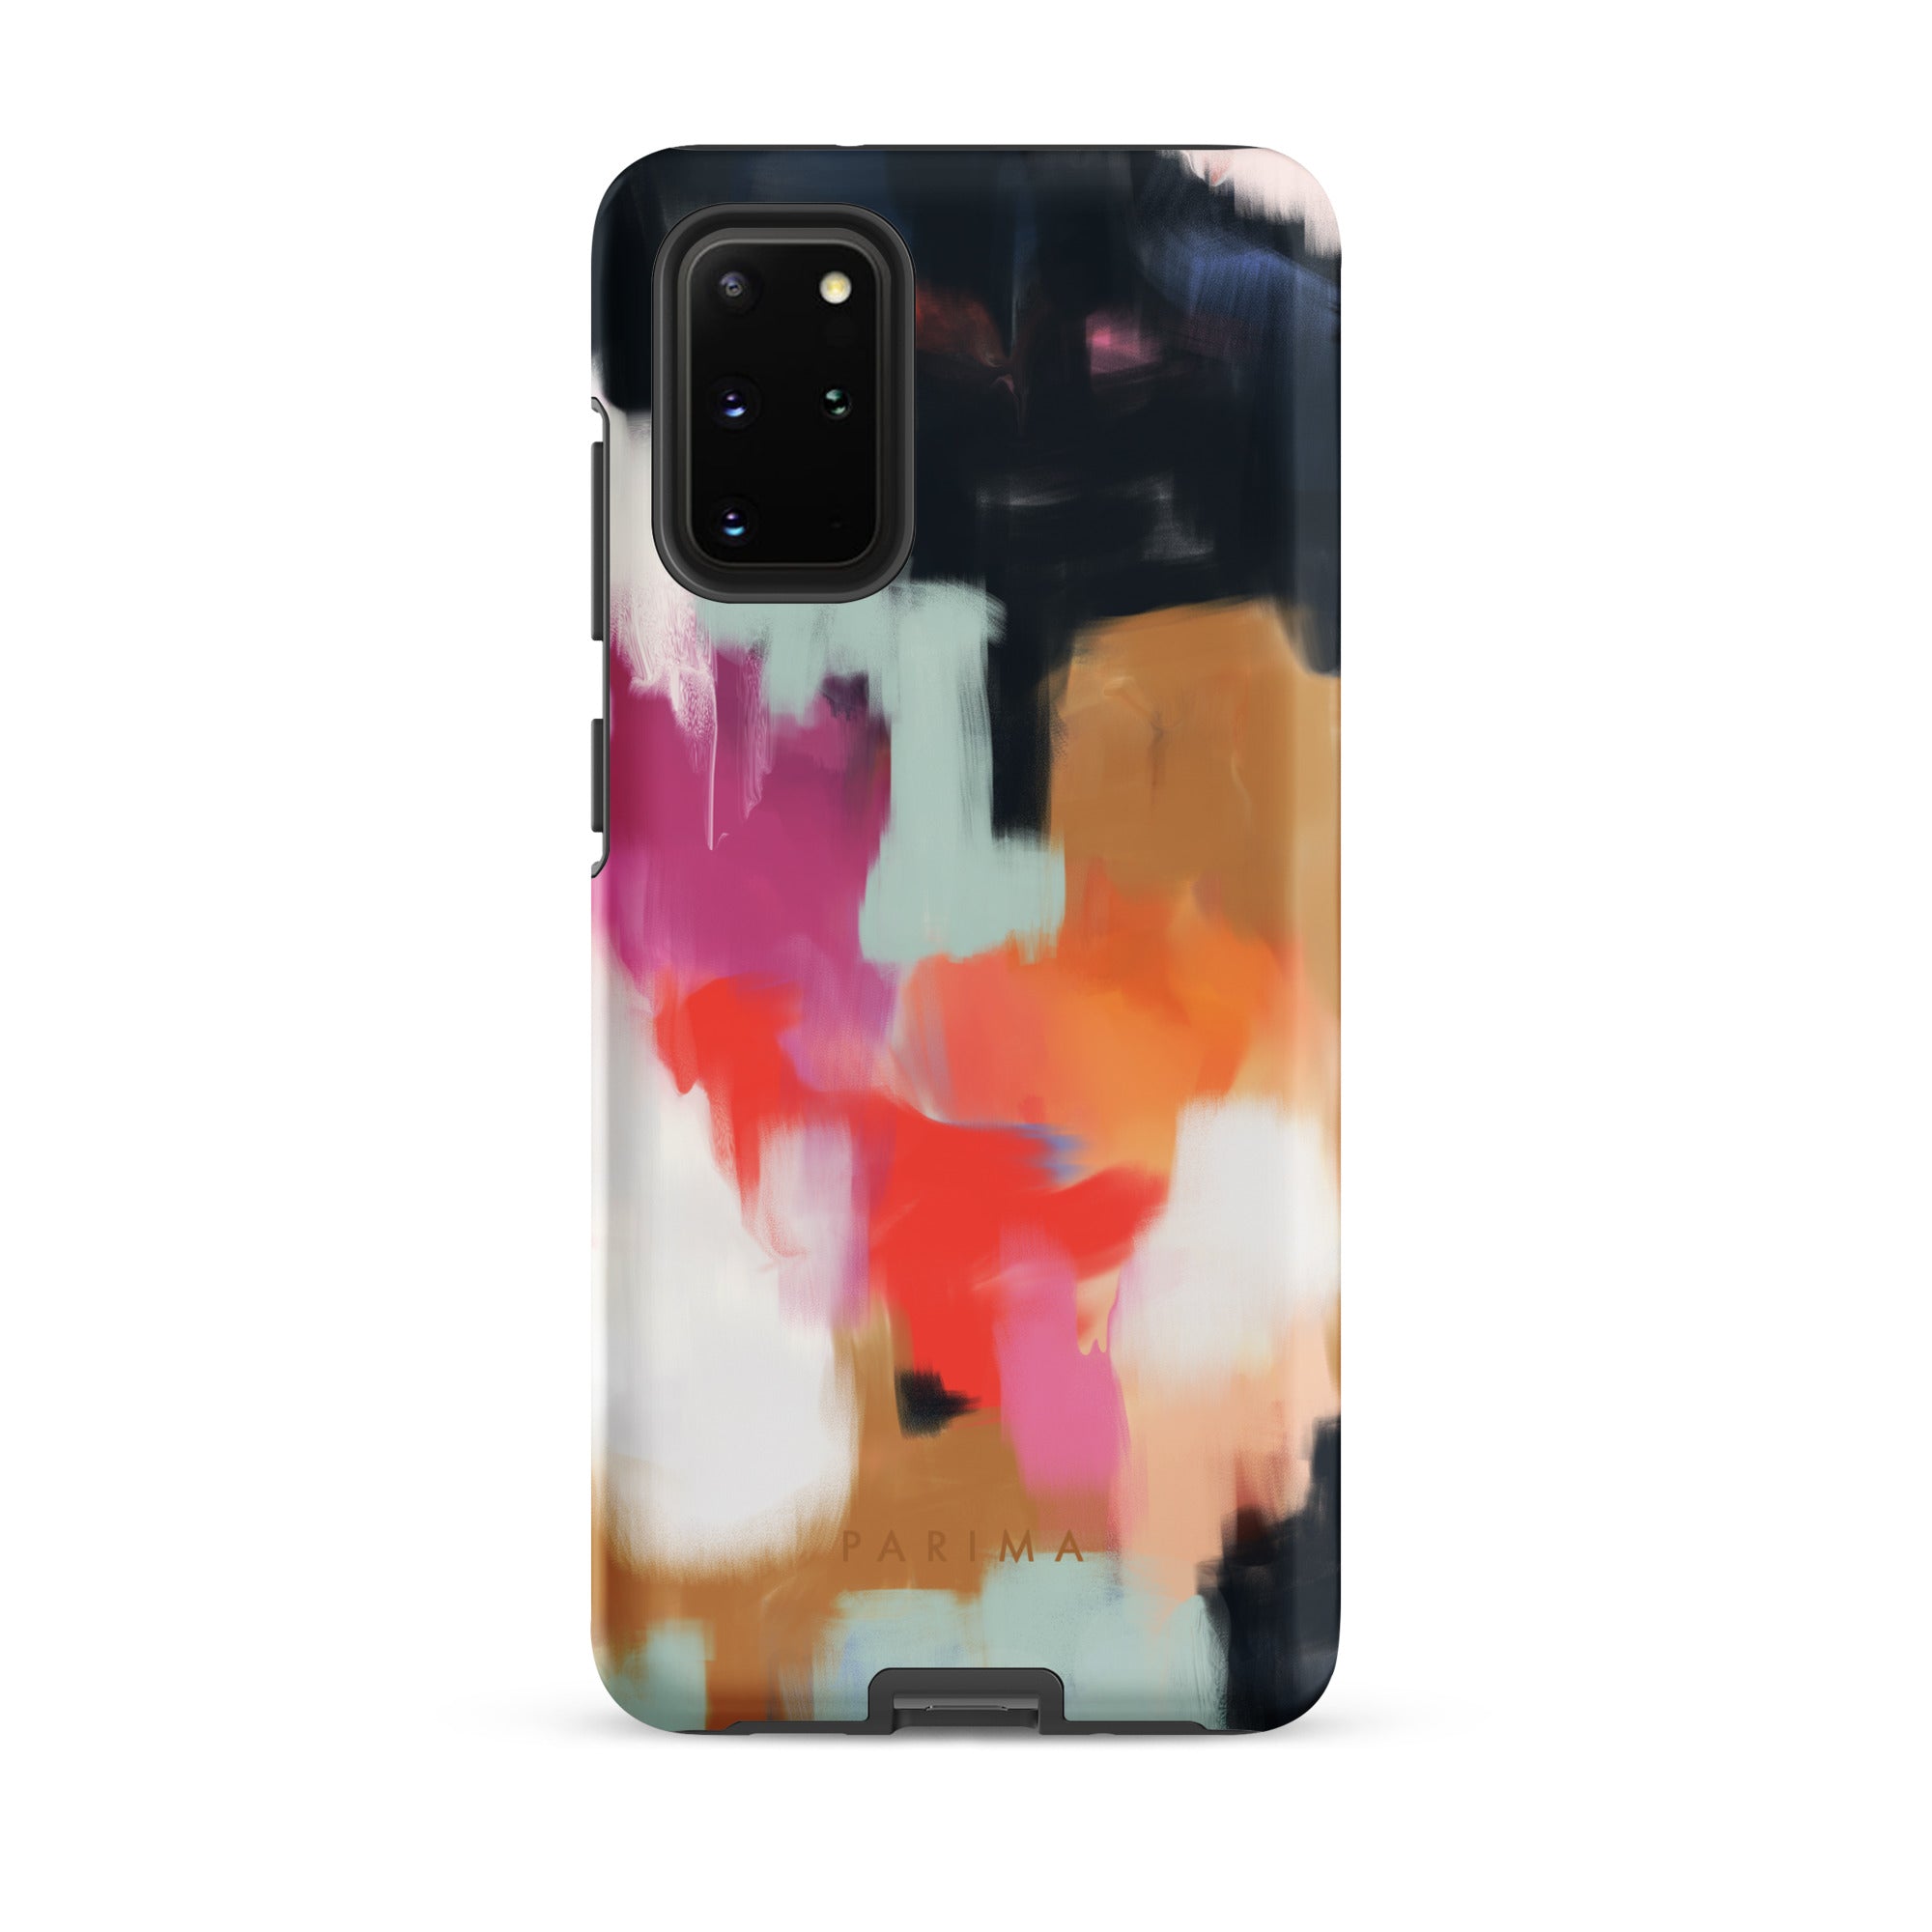 Ruthie, blue and pink abstract art on Samsung Galaxy S20 Plus tough case by Parima Studio